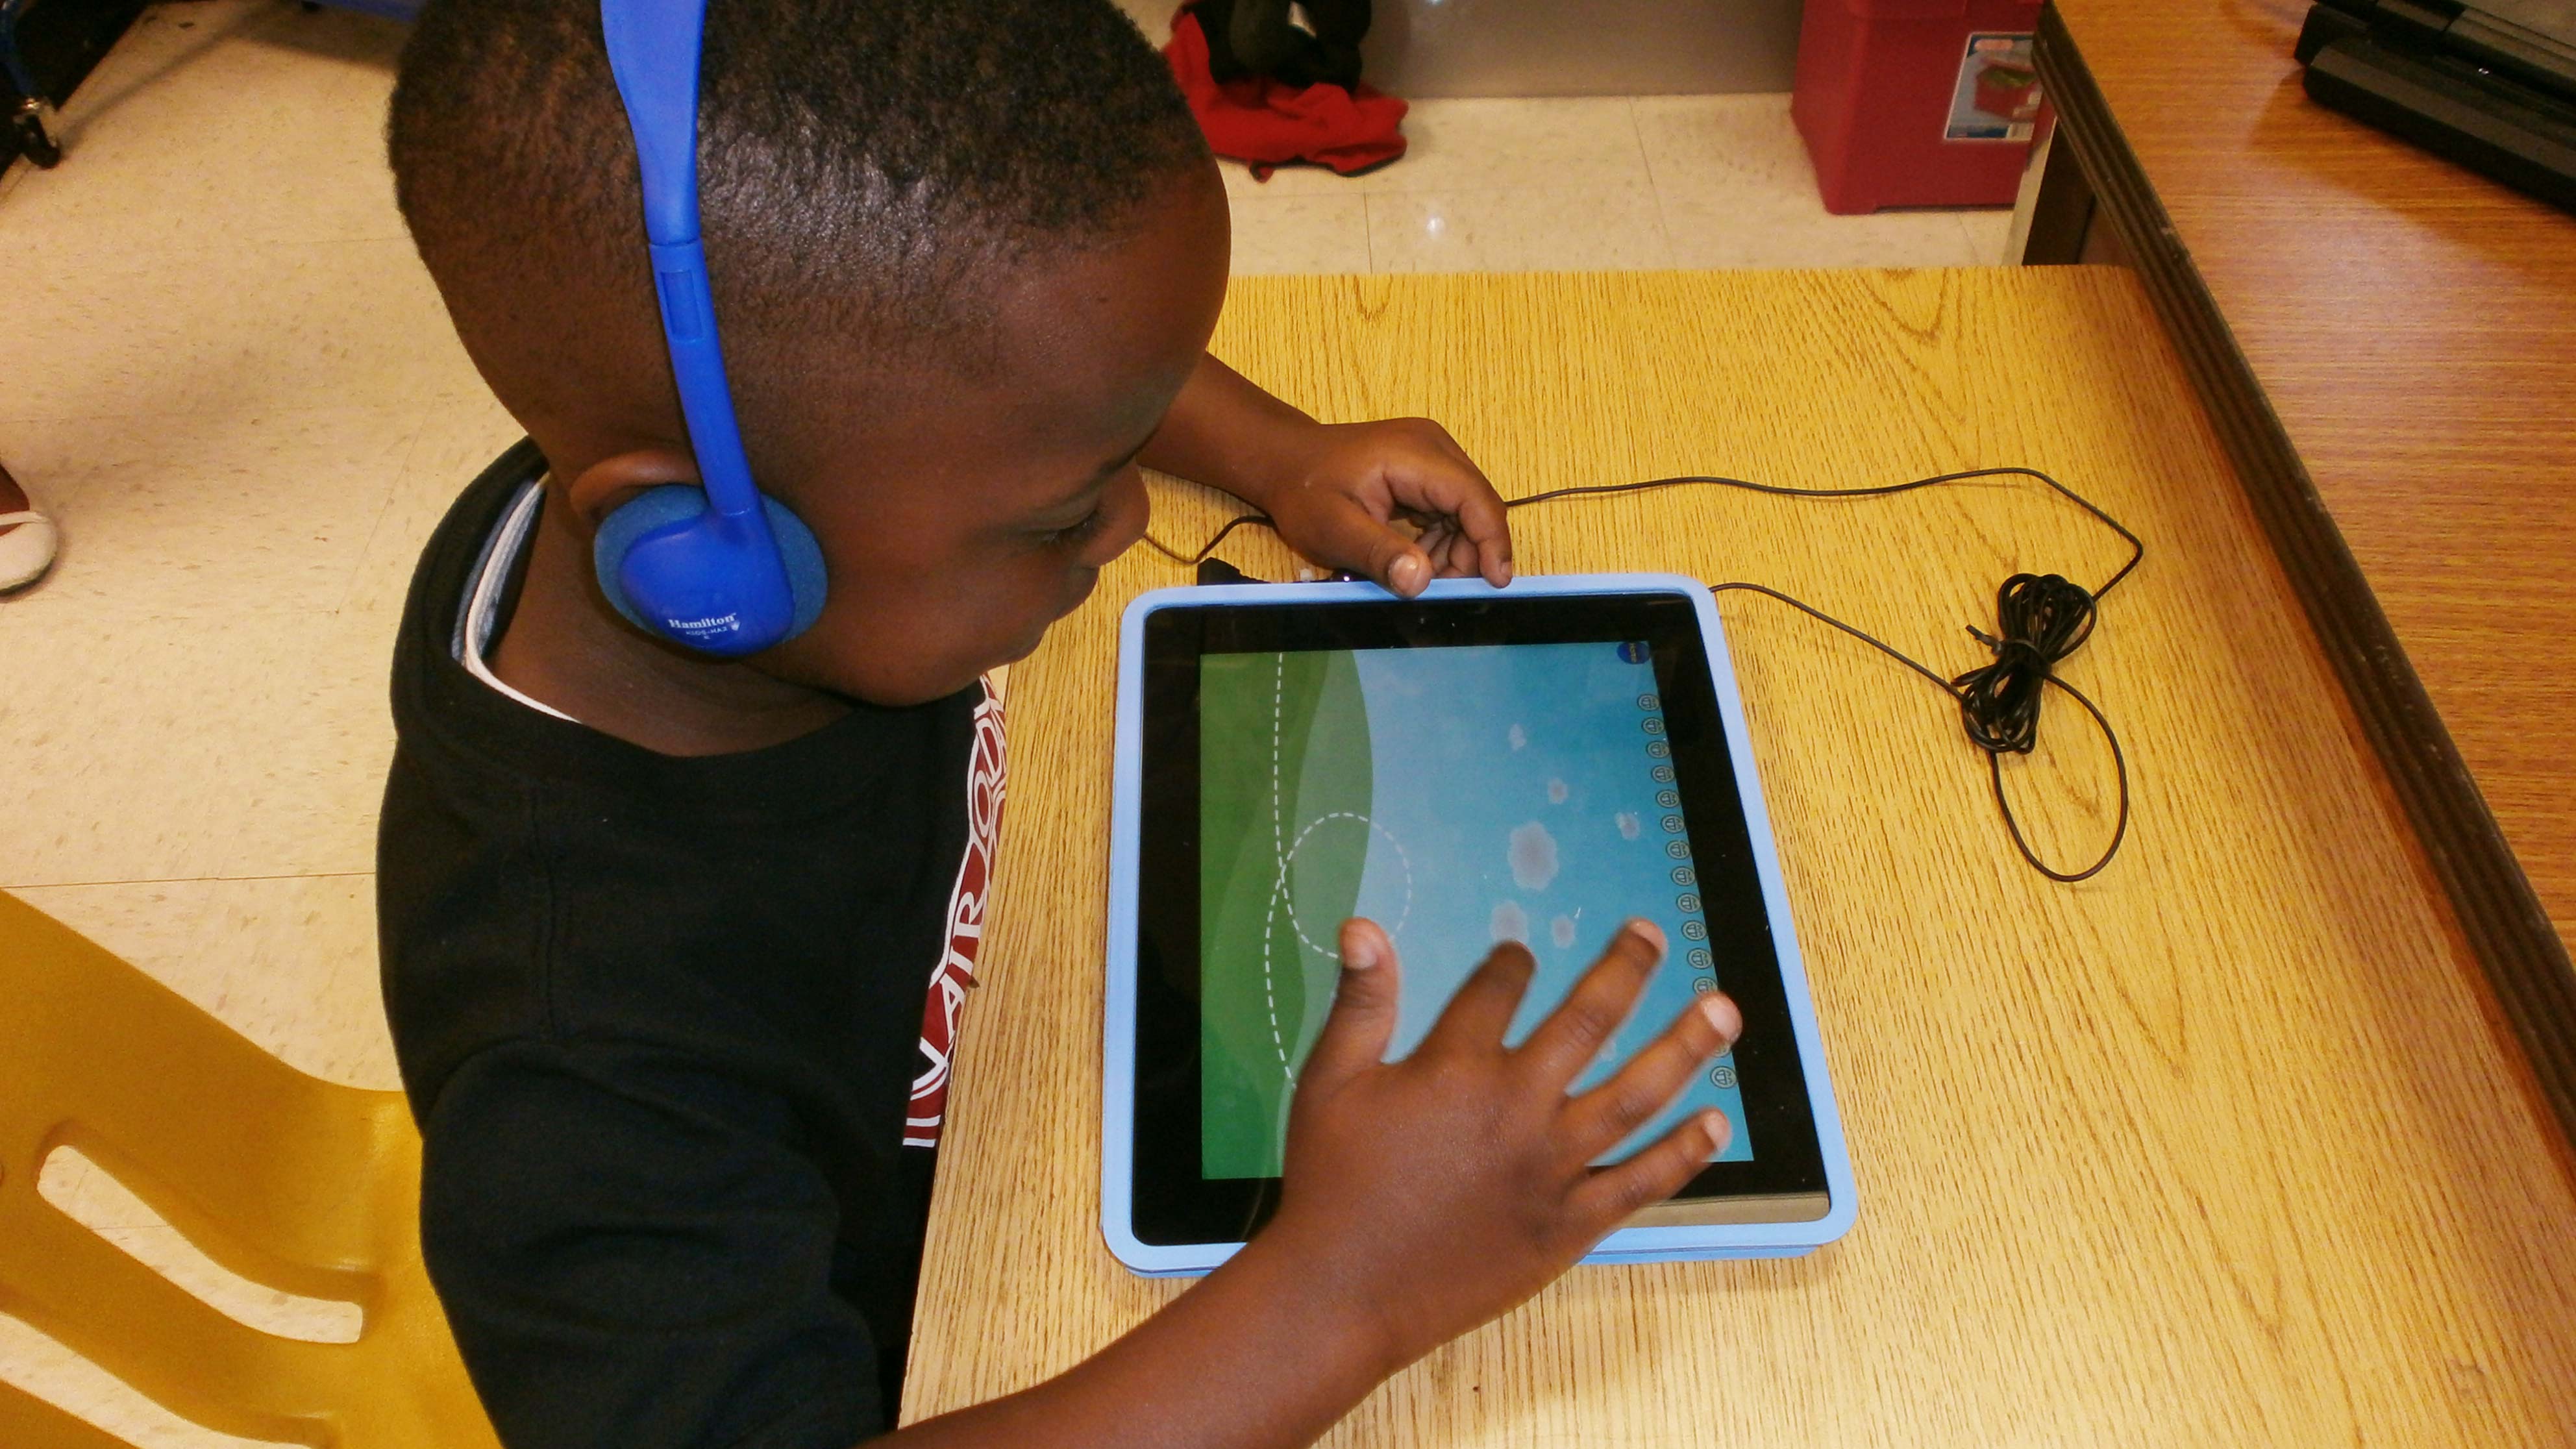 Children as early as Pre-Kindergarten at Love T. Nolan Elementary School in College Park, Georgia have access to the iPad to reinforce techniques taught in the classroom. https://www.flickr.com/photos/116952757@N08/14161914543